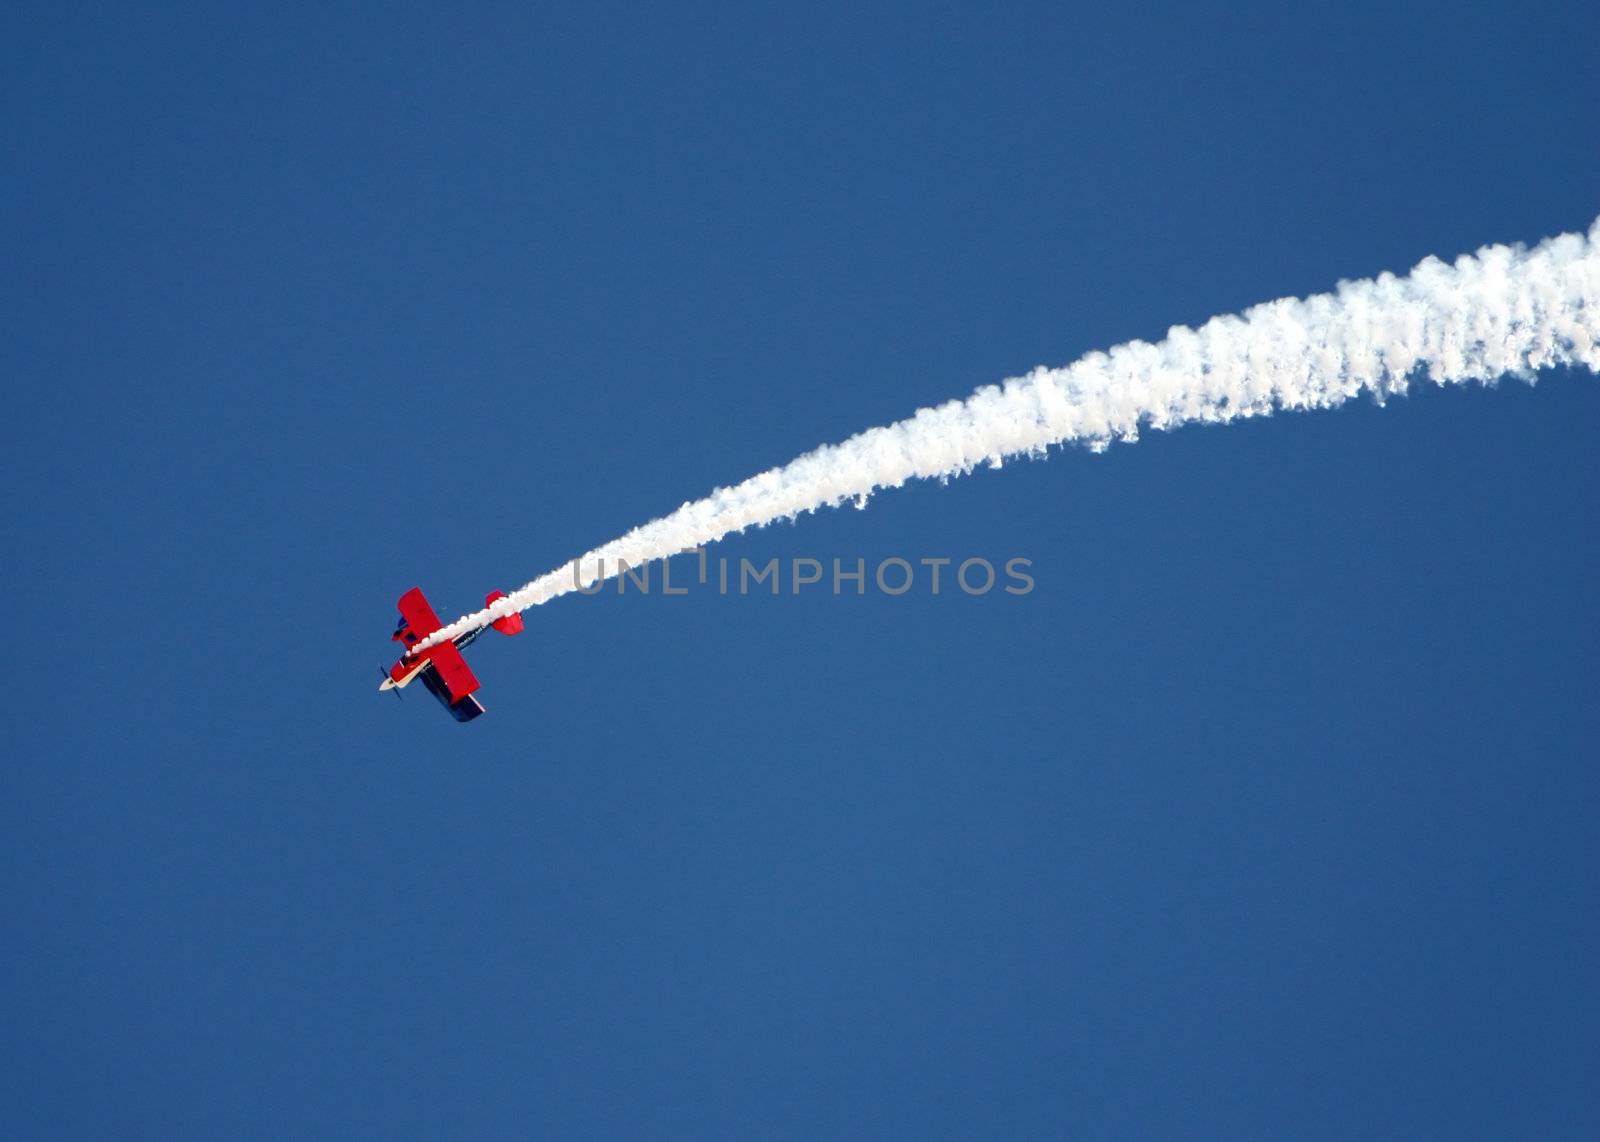 A stunt airplane performs a inverted roll at an airshow. Bright blue sky